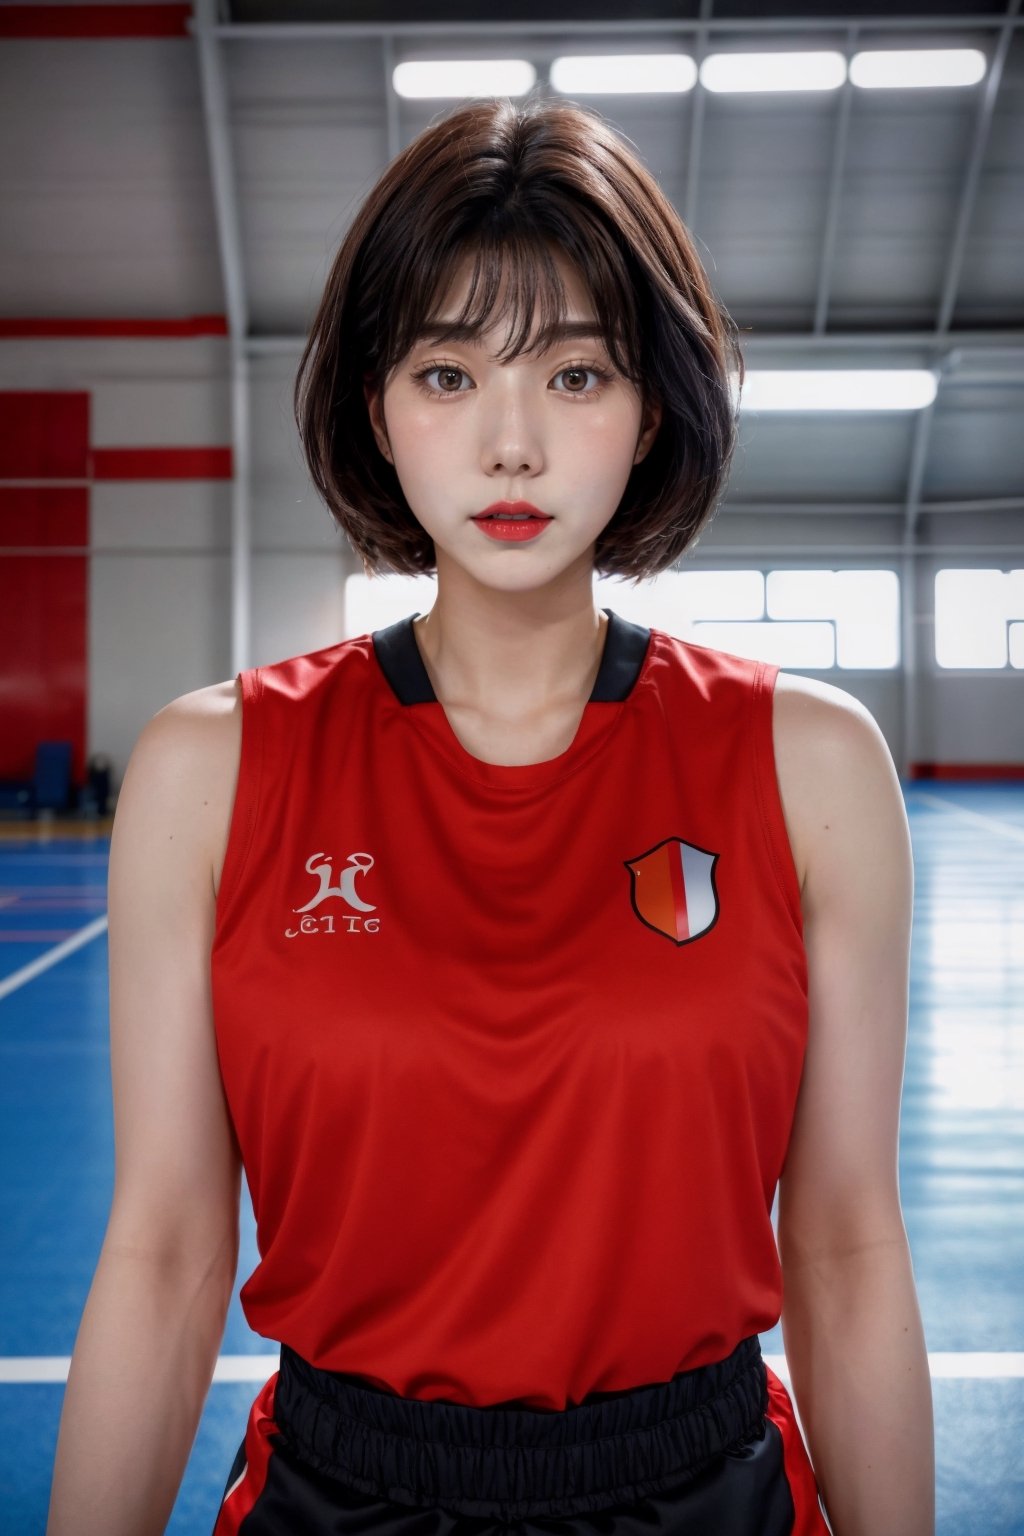 portrait photography capturing a surreal of mt-leesoyoung, wearing black and red sleeveless jersey, standing in the the gym with serene grace, close up shot, gymnasium, natural light, masterpiece, 8k, ultra high definition, taken with 50mm lens on Fujifilm XT4, in style of Liam Wong, ,mt-leesoyoung